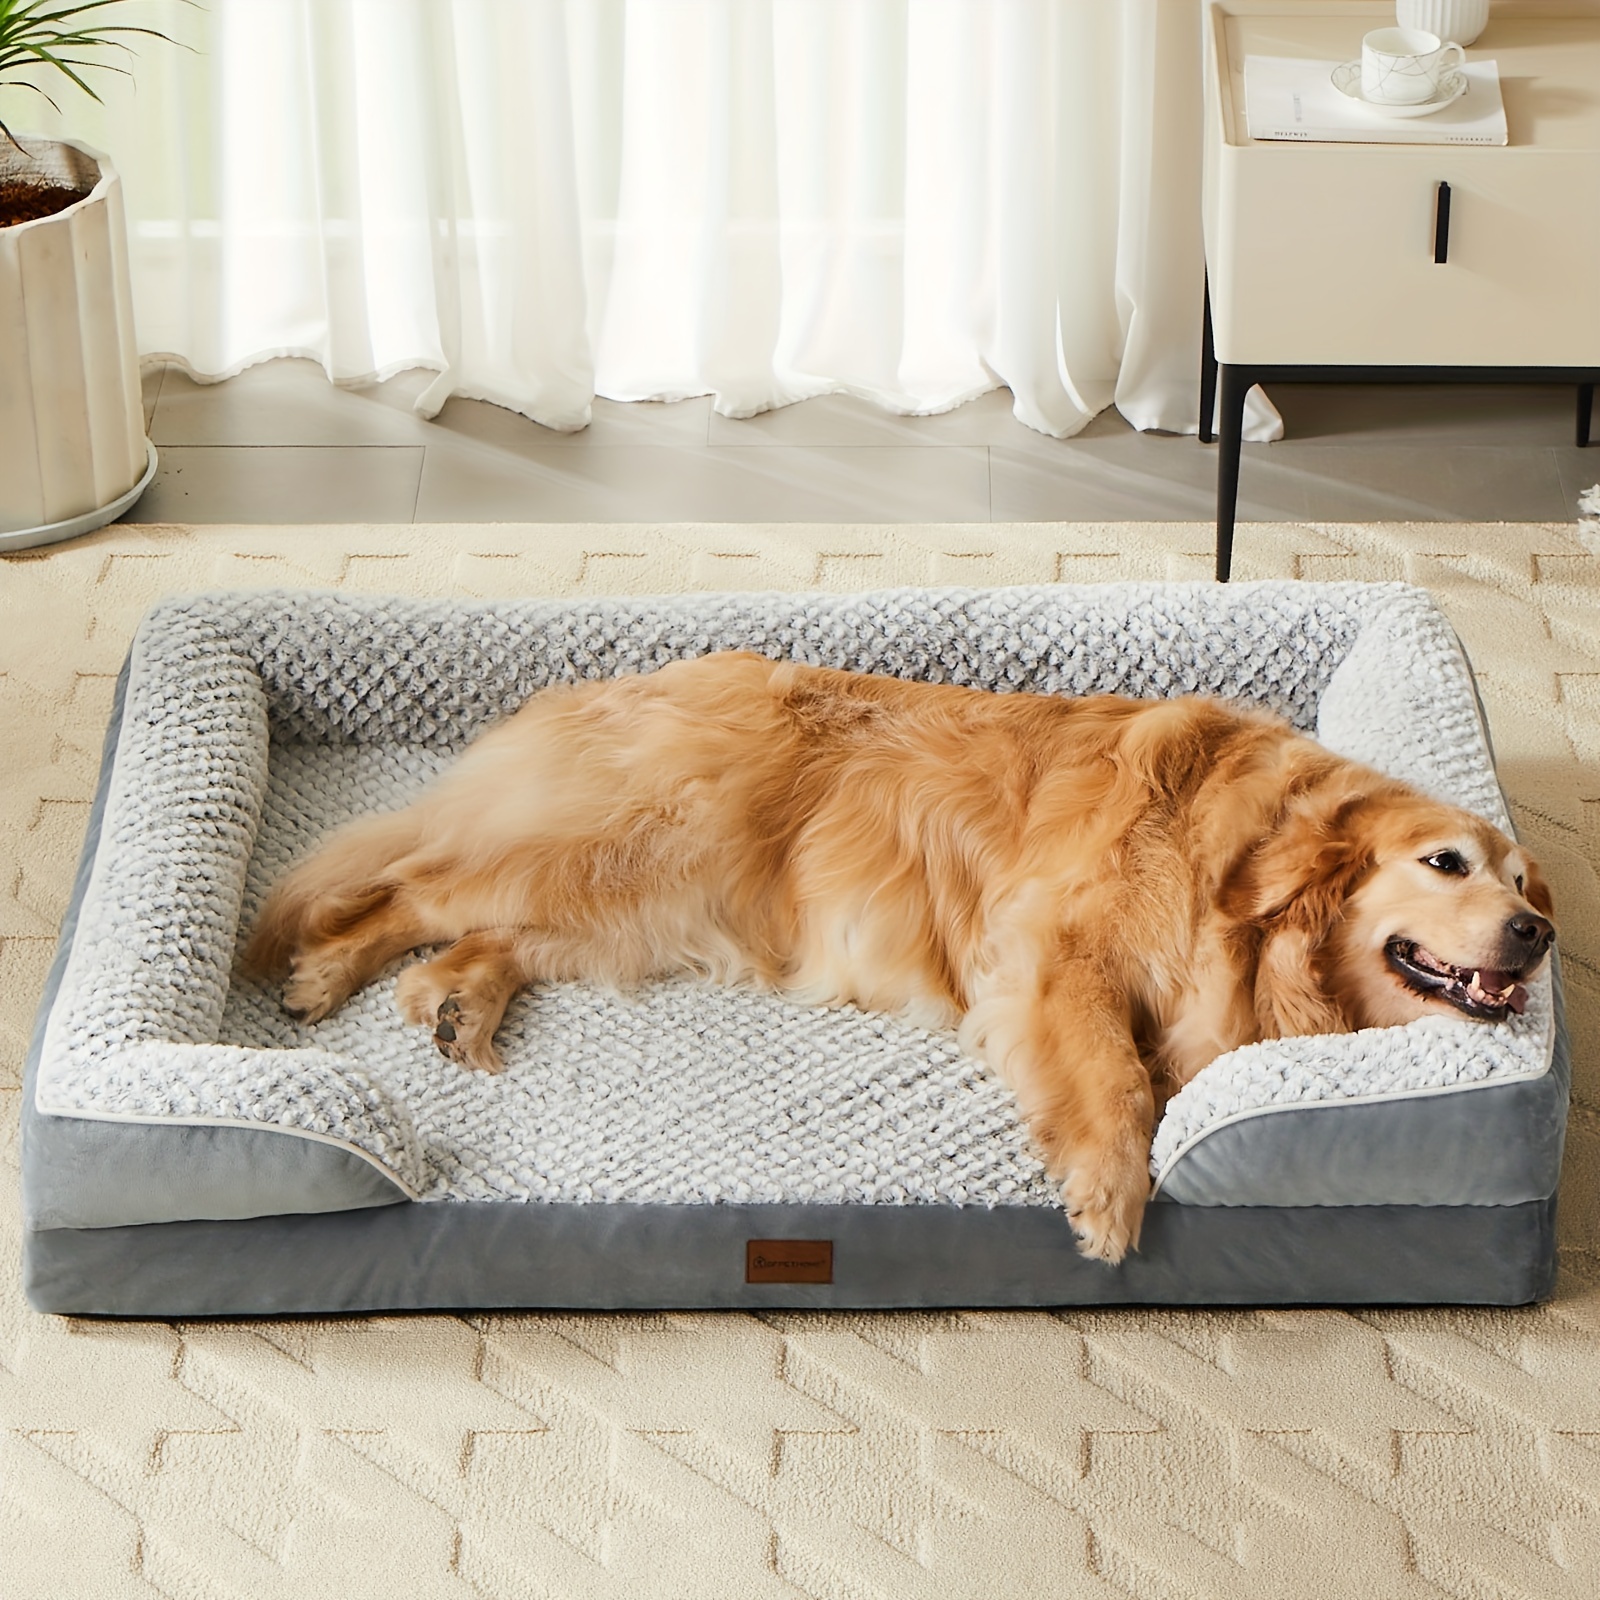 

Orthopedic Dog Beds For Large Dogs, Sofa Dog Bed For Extra Large Dogs Egg Foam Extra Large Dog Bed With Removable Washable Pillow Cover, Waterproof Dog Couch Bed With Anti-slip Bottom